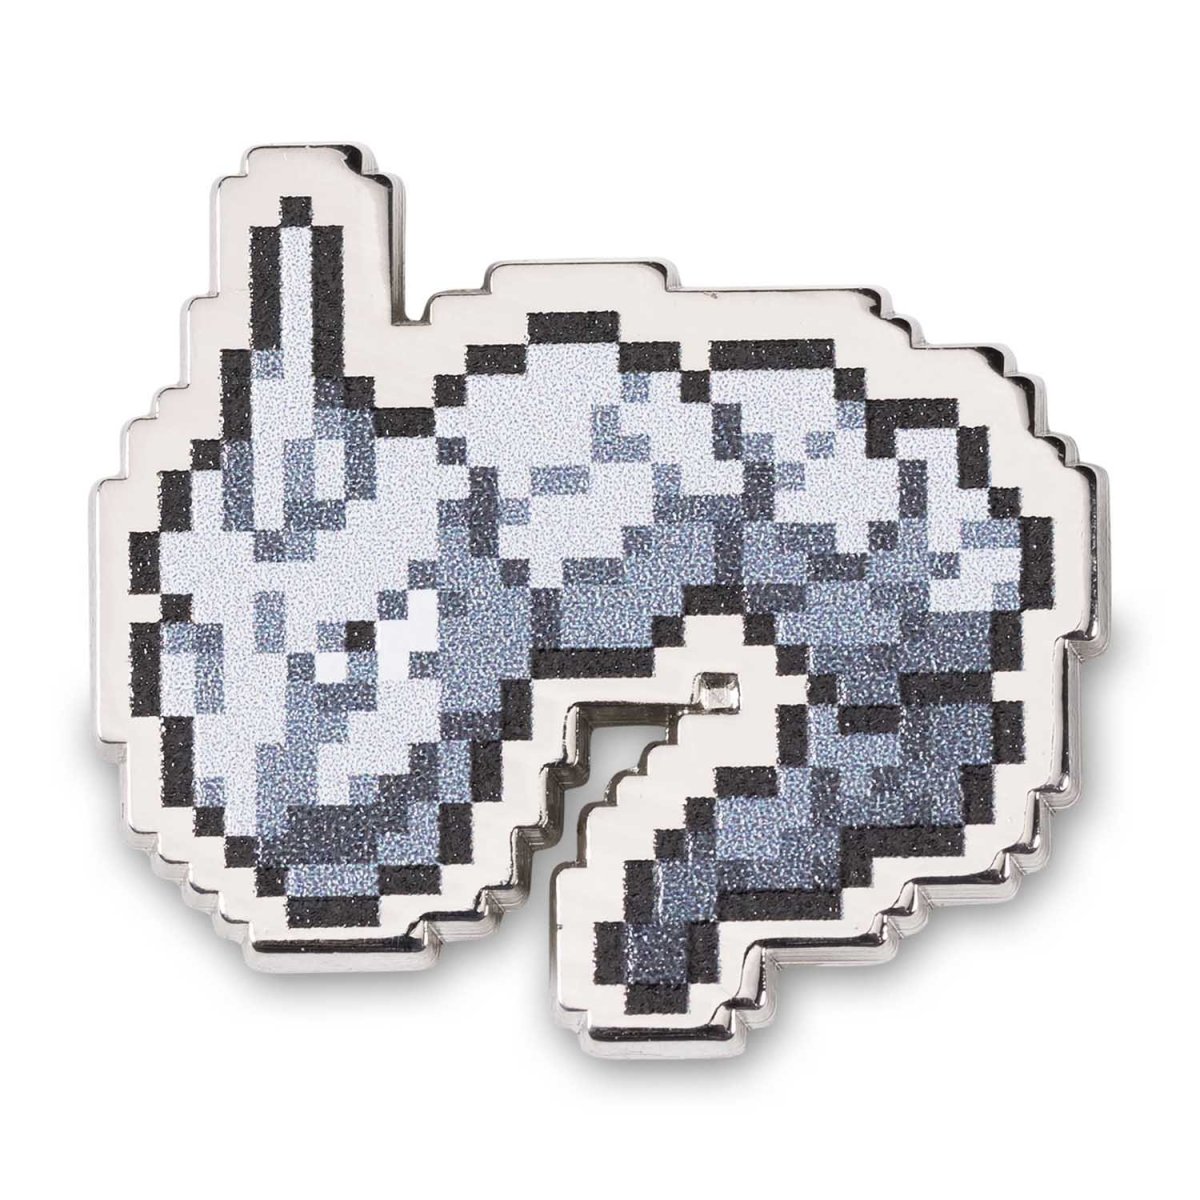 Onix official artwork gallery